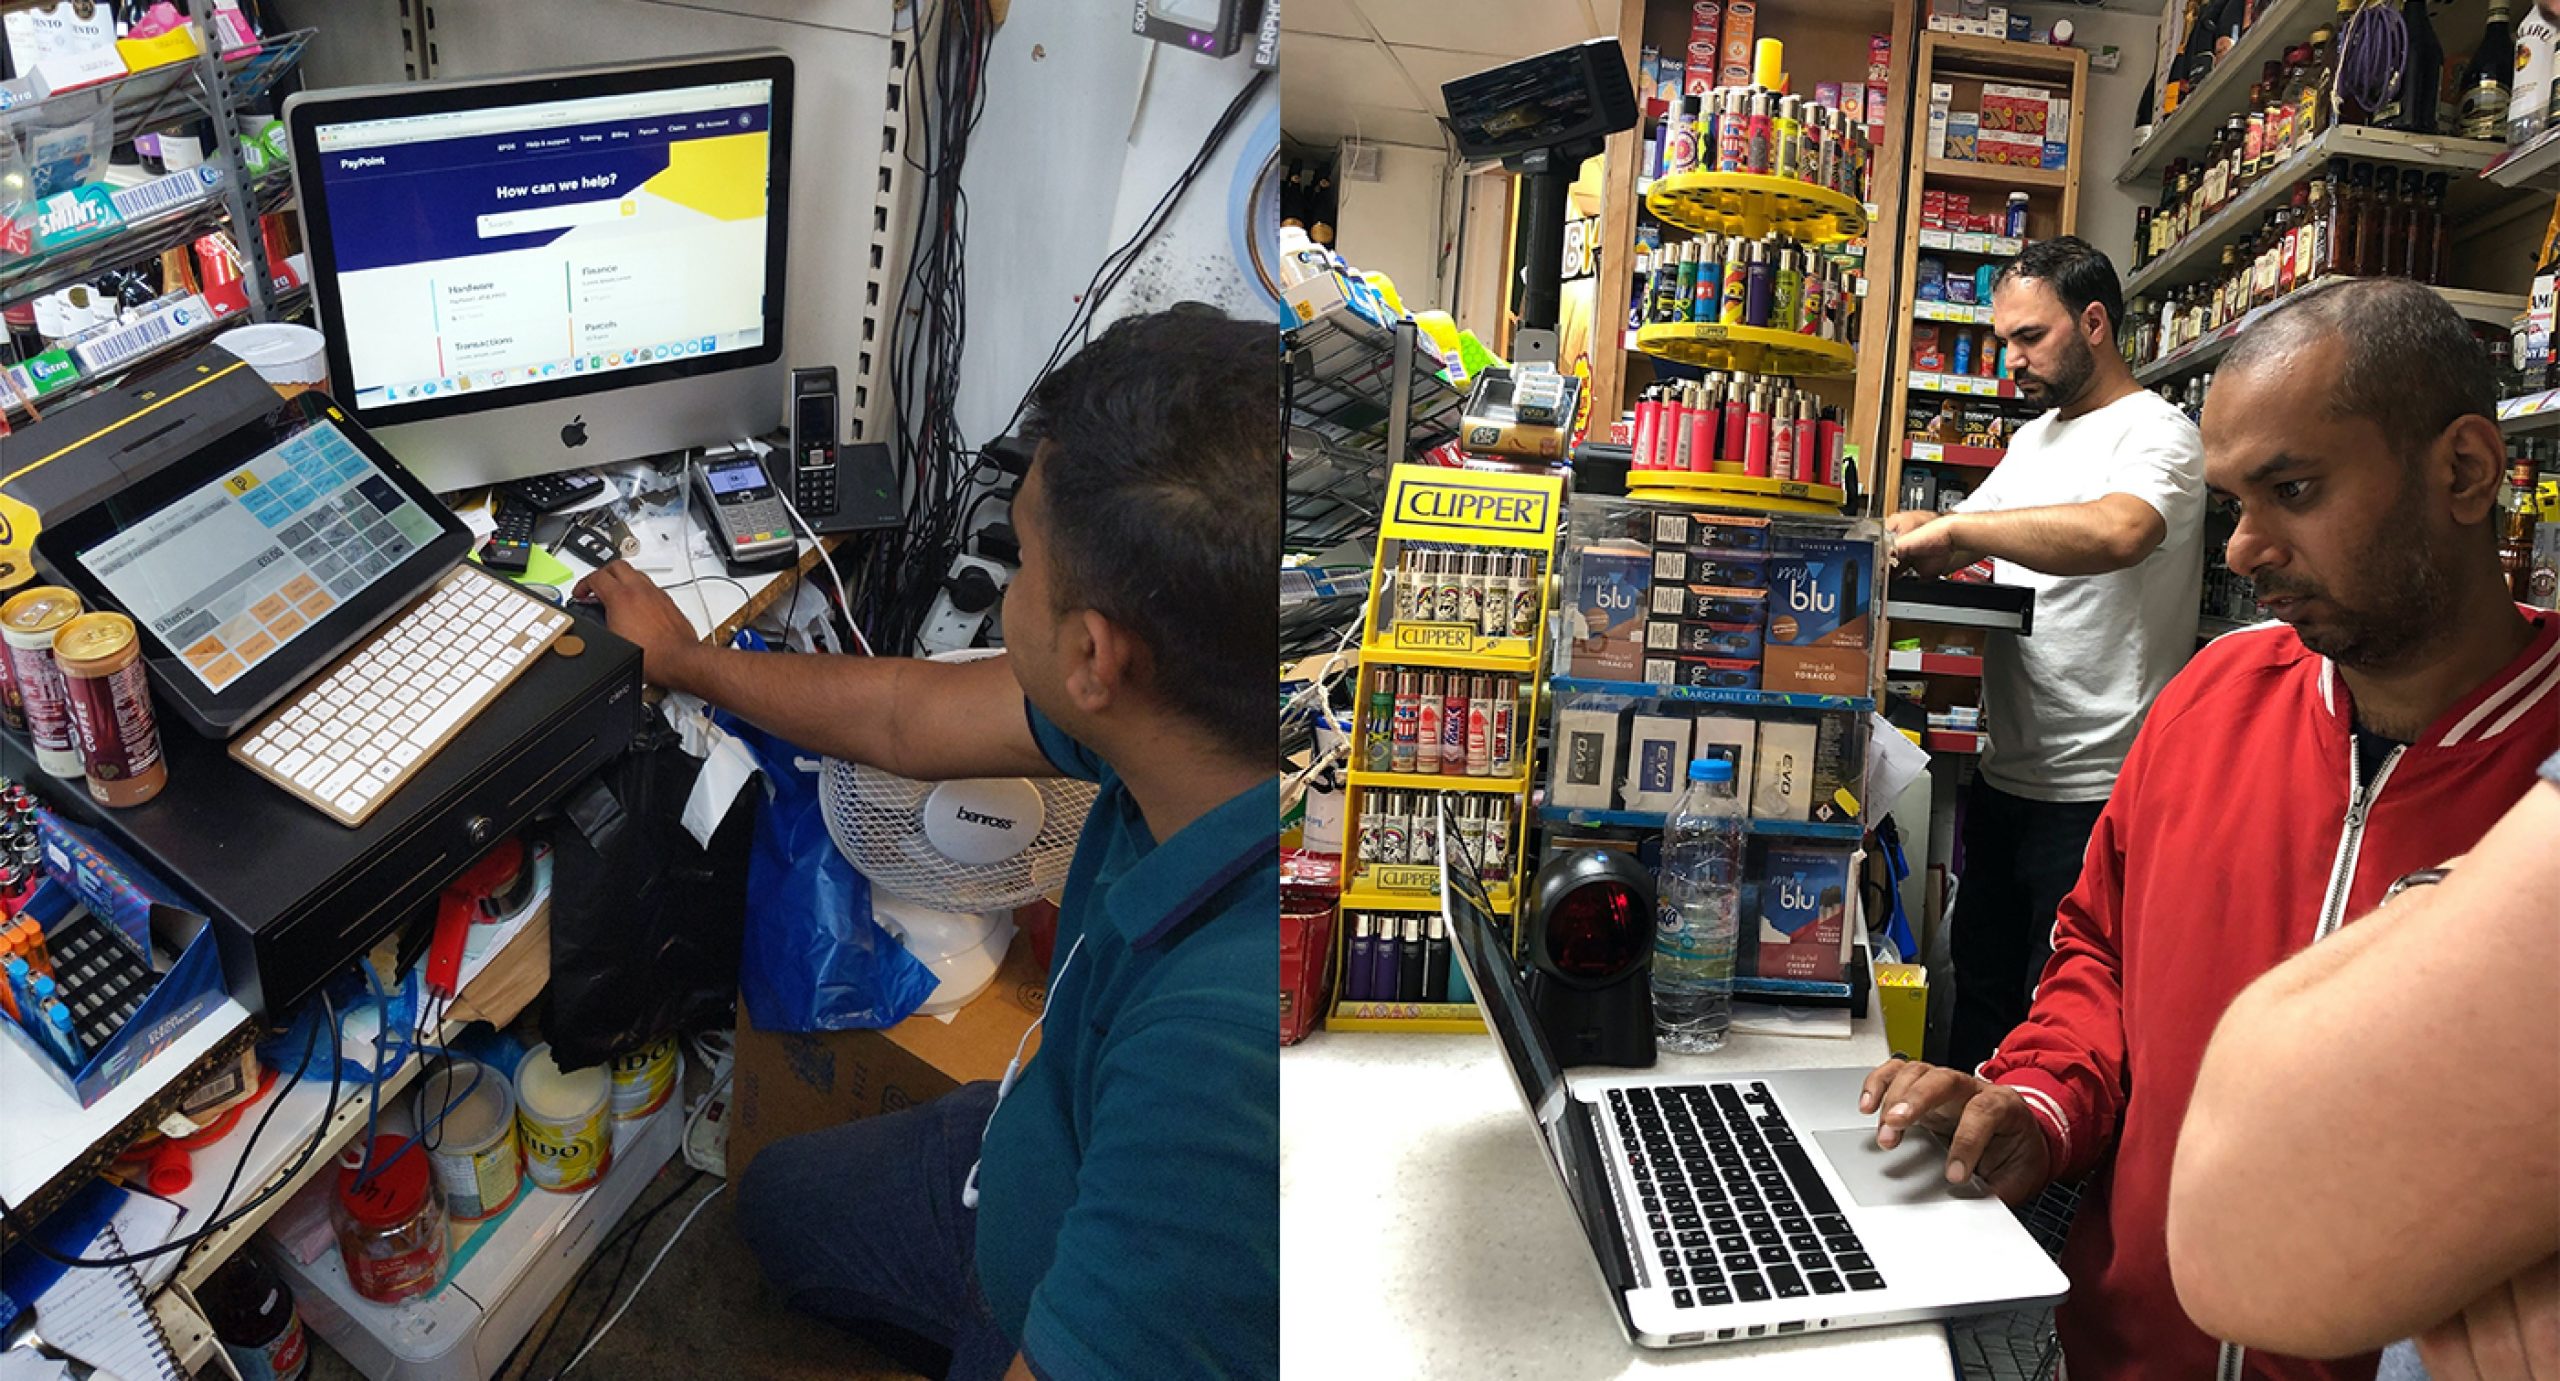 Two photos of users in shops testing the product. Both of them are in cramped conditions behind their counters.